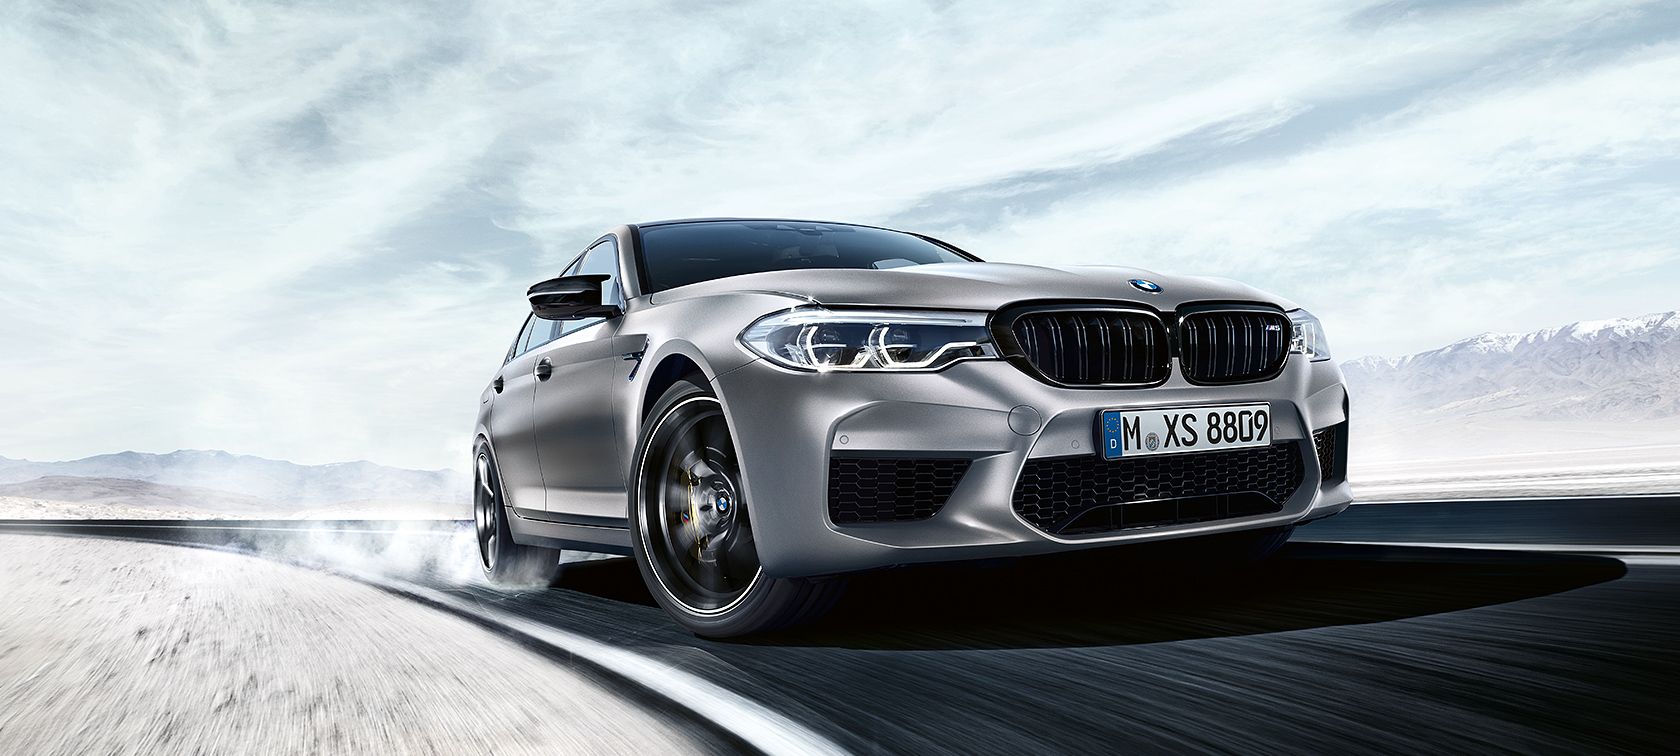 BMW M5 with M xDrive: At a glance